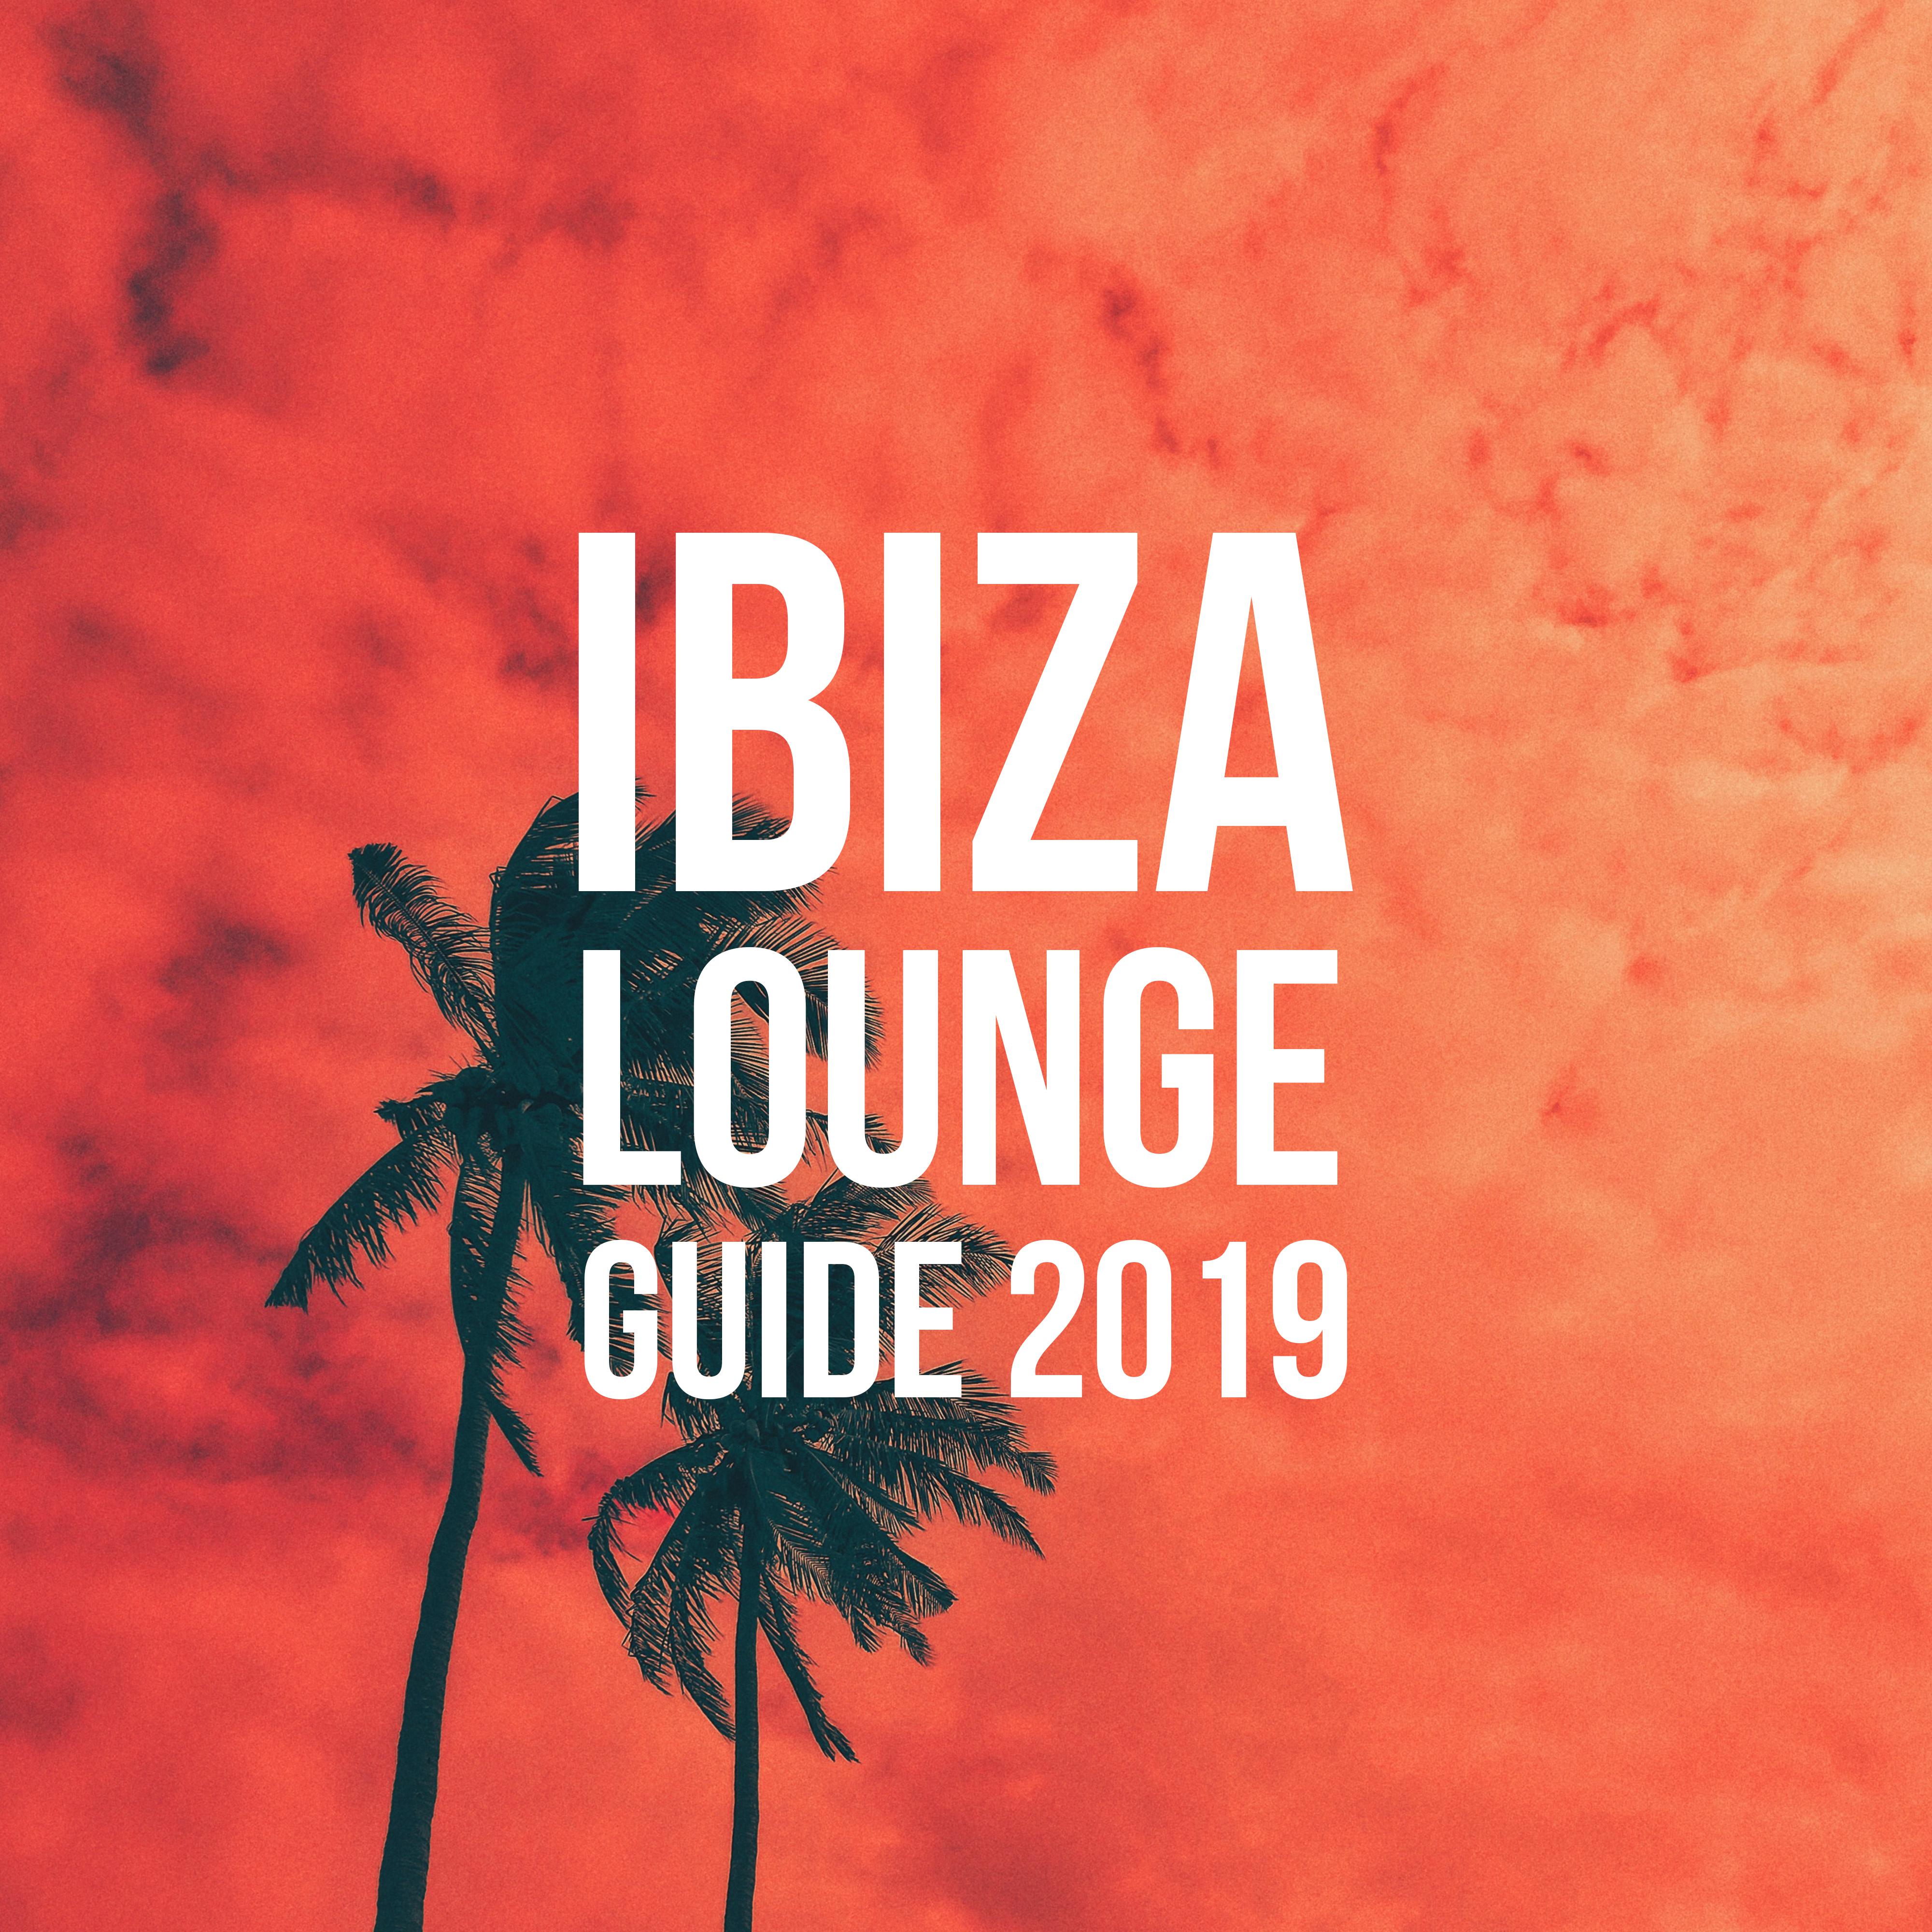 Ibiza Lounge Guide 2019  Summer Hits, Dance Music, Relax, Chill, Beach Lounge, Music Zone, Chill Out 2019